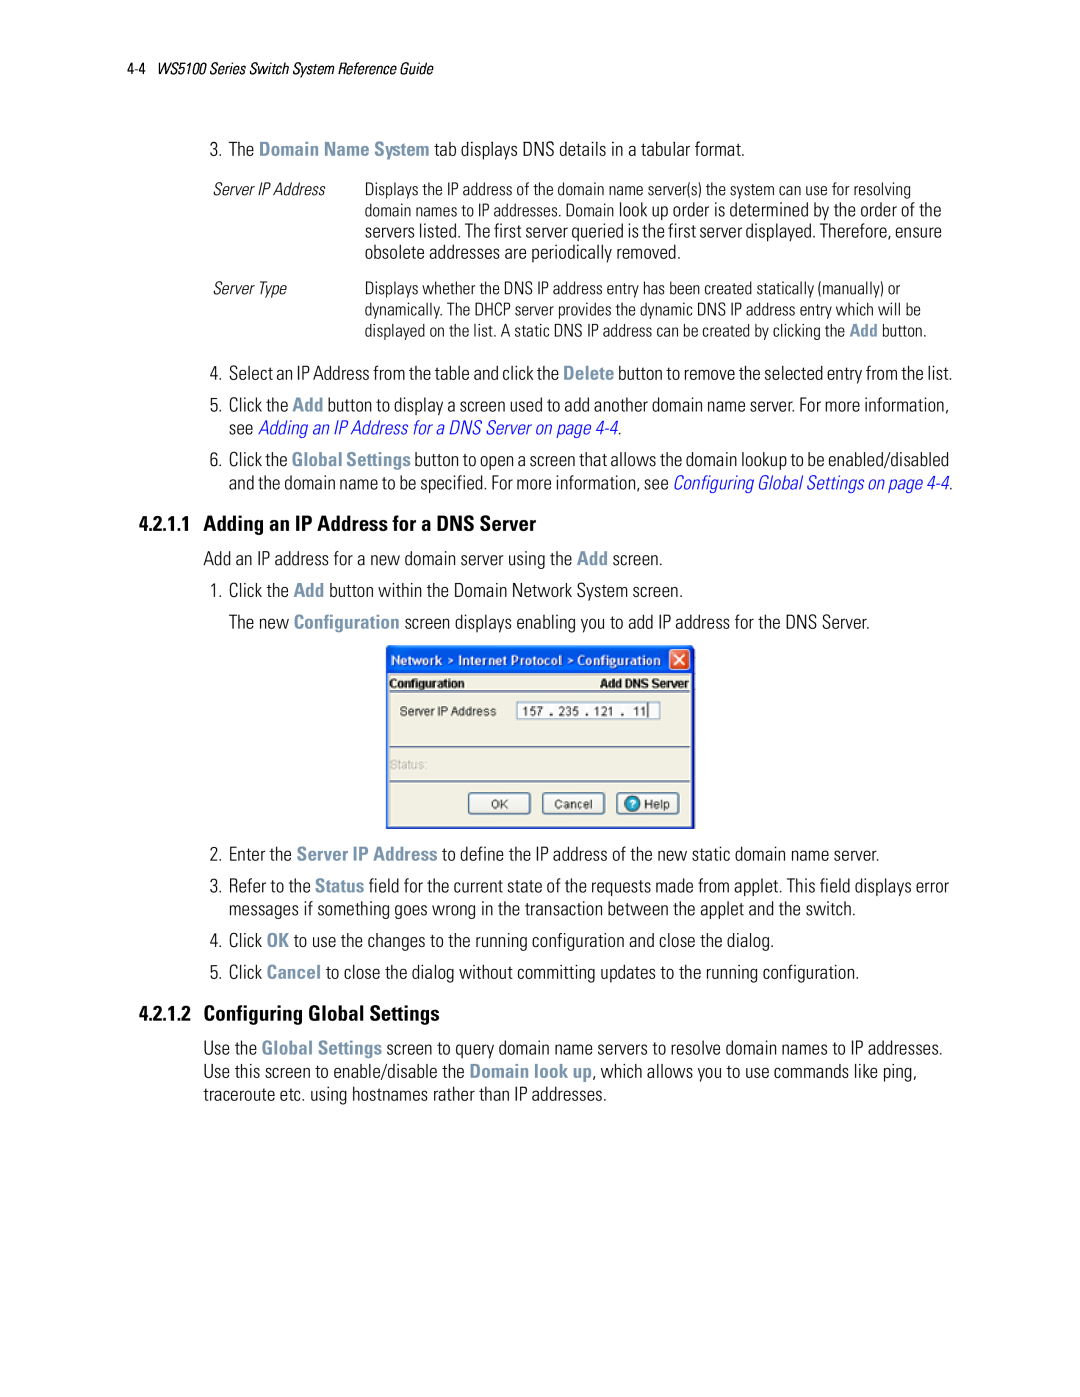 Motorola WS5100 manual 4.2.1.1Adding an IP Address for a DNS Server, 4.2.1.2Configuring Global Settings 